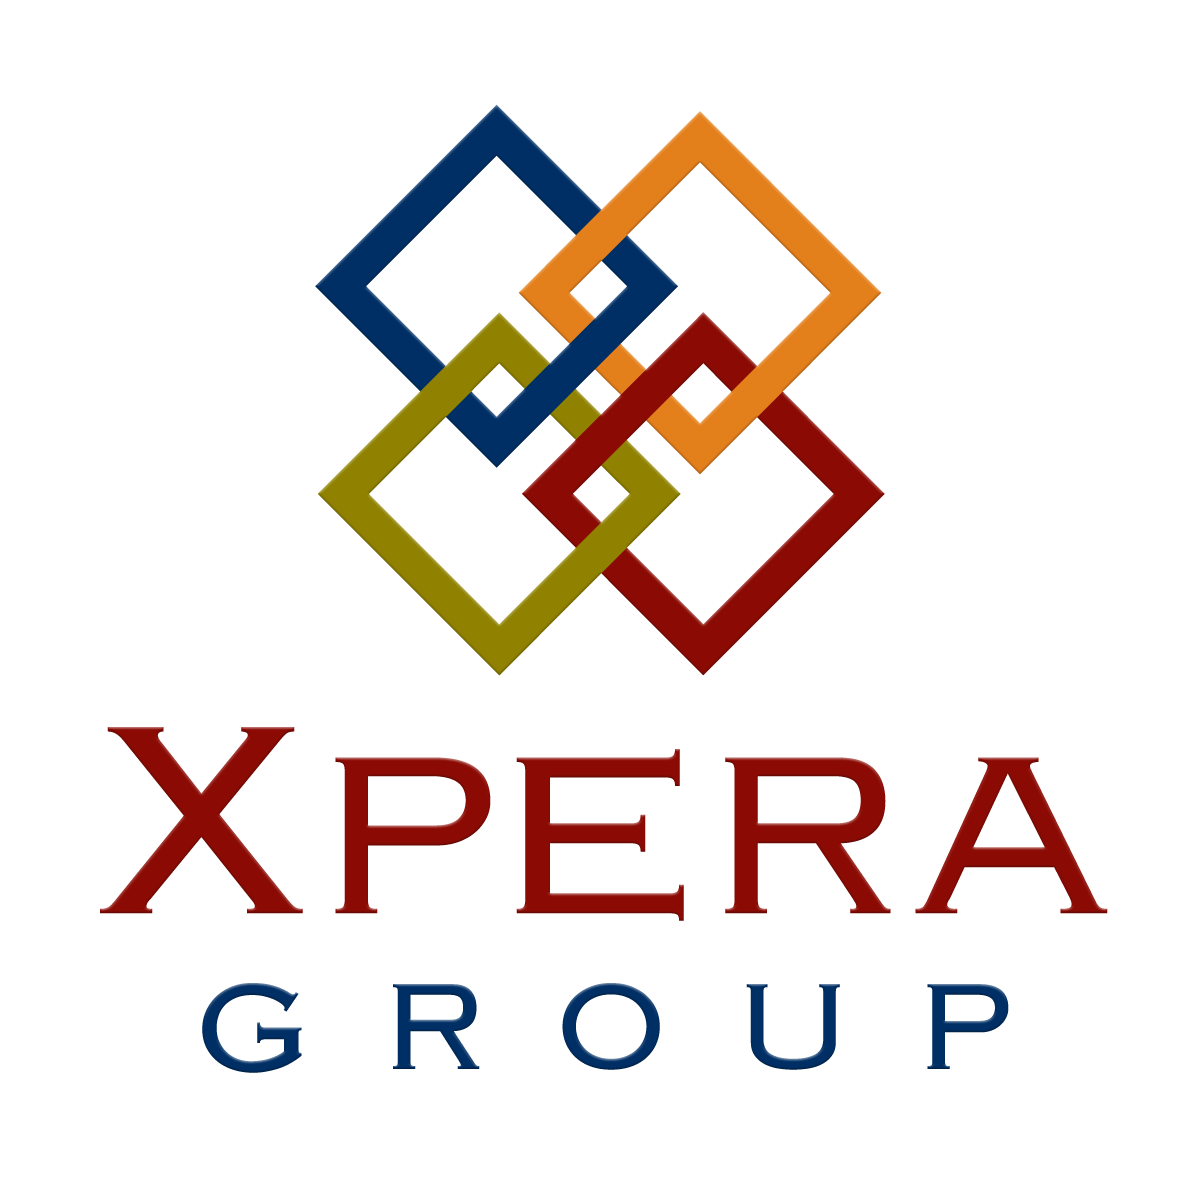 Xpera Group: The West Coast's most comprehensive team of construction consultants, real estate advisors and forensic experts